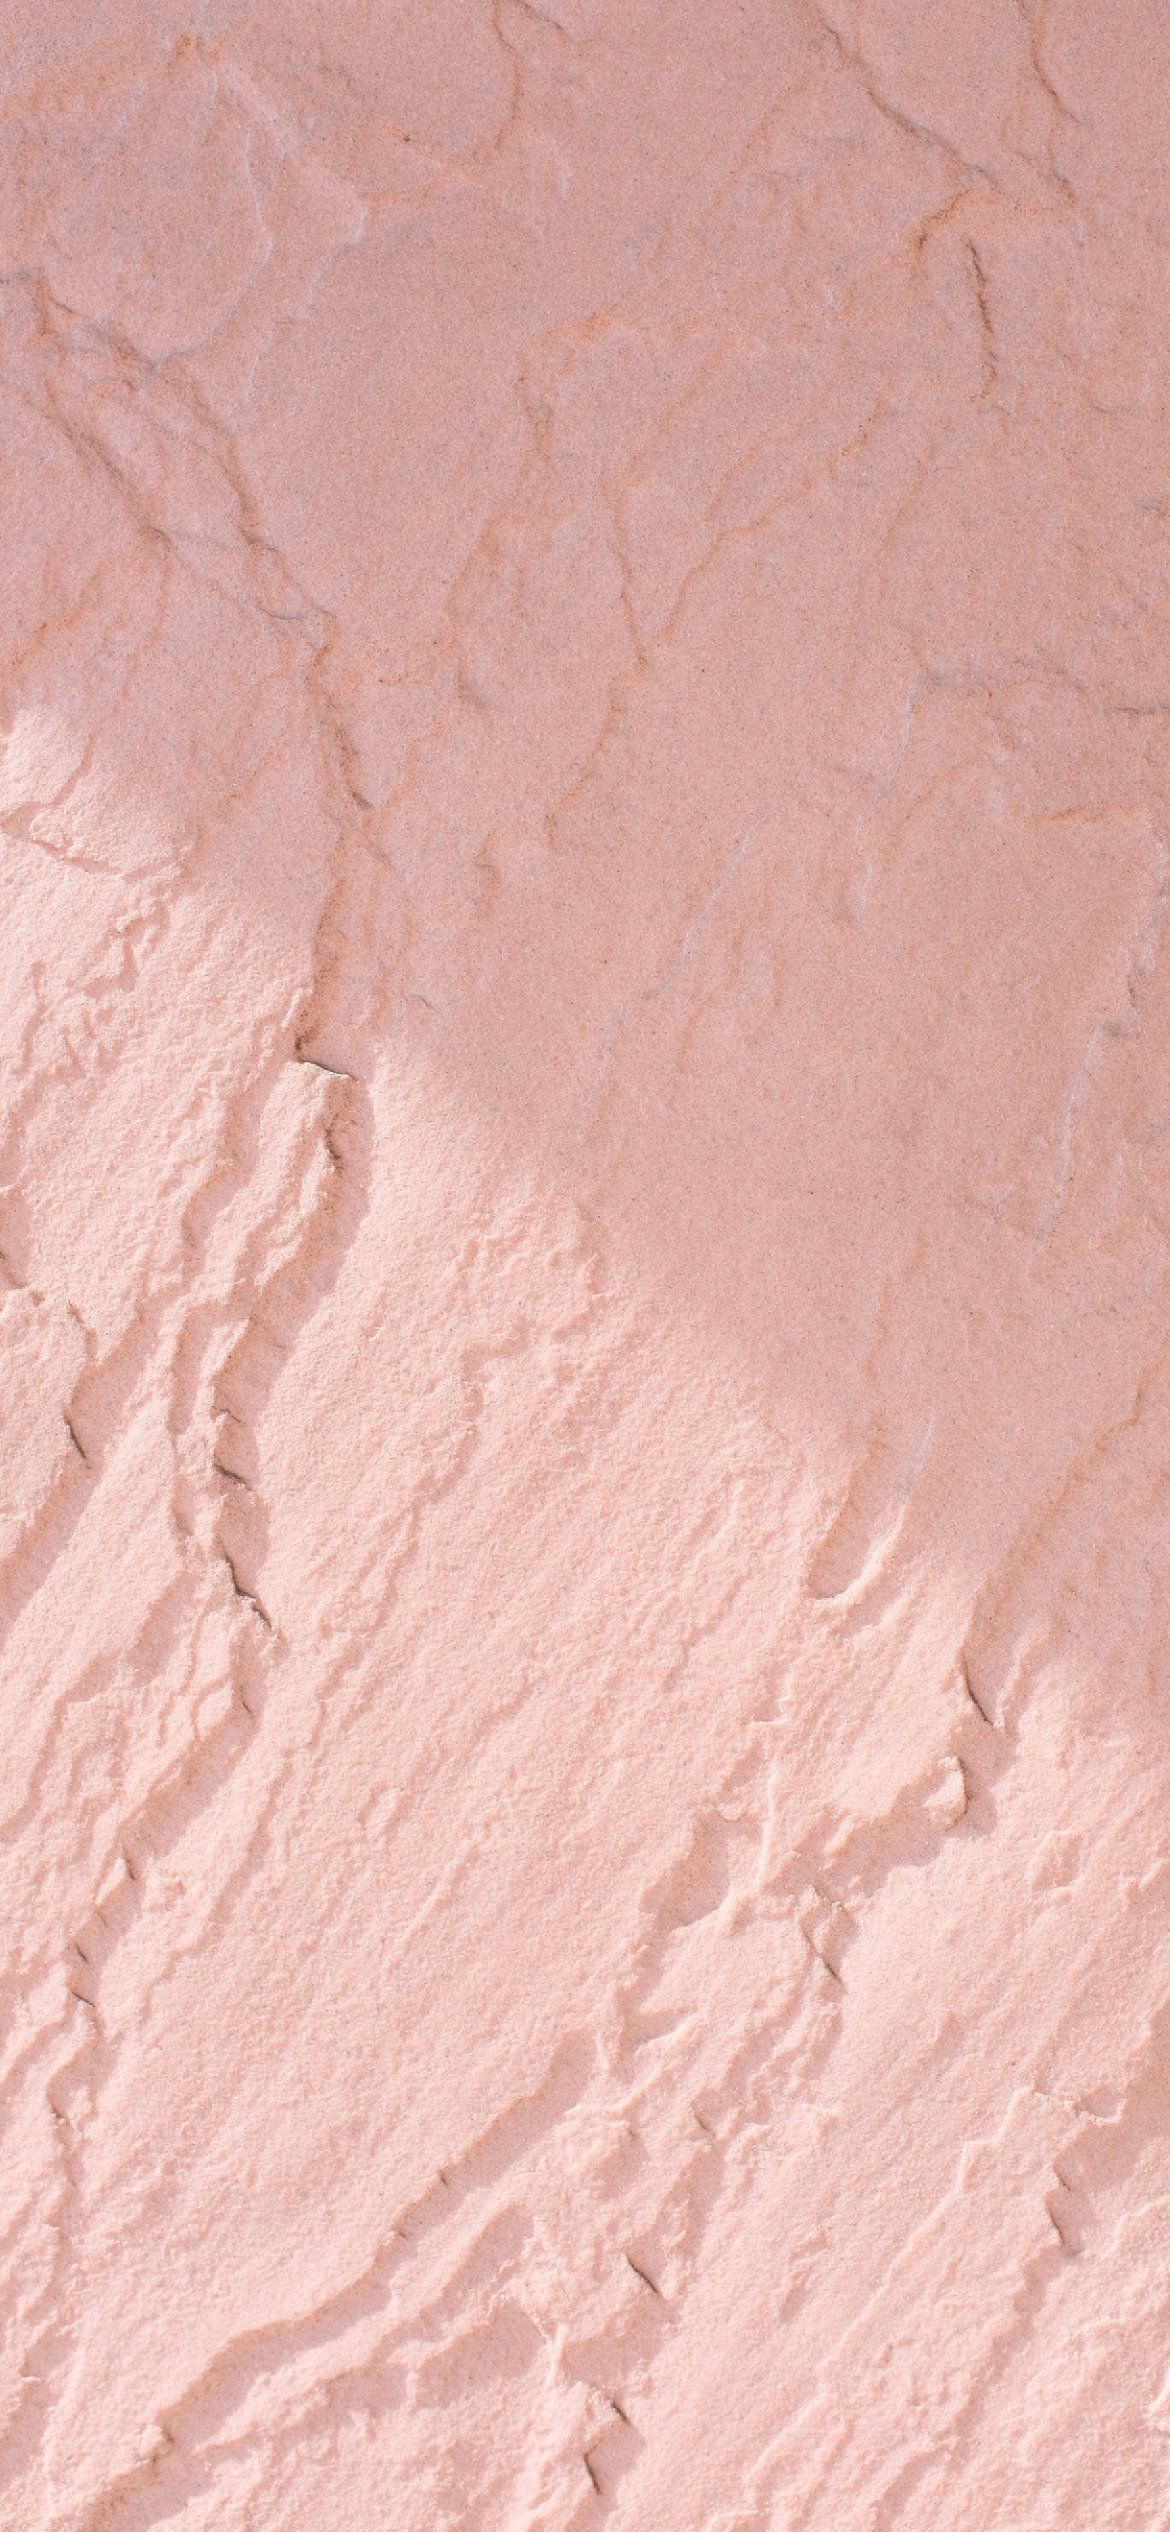 A close up of a pink stucco wall with cracks in it - Light pink